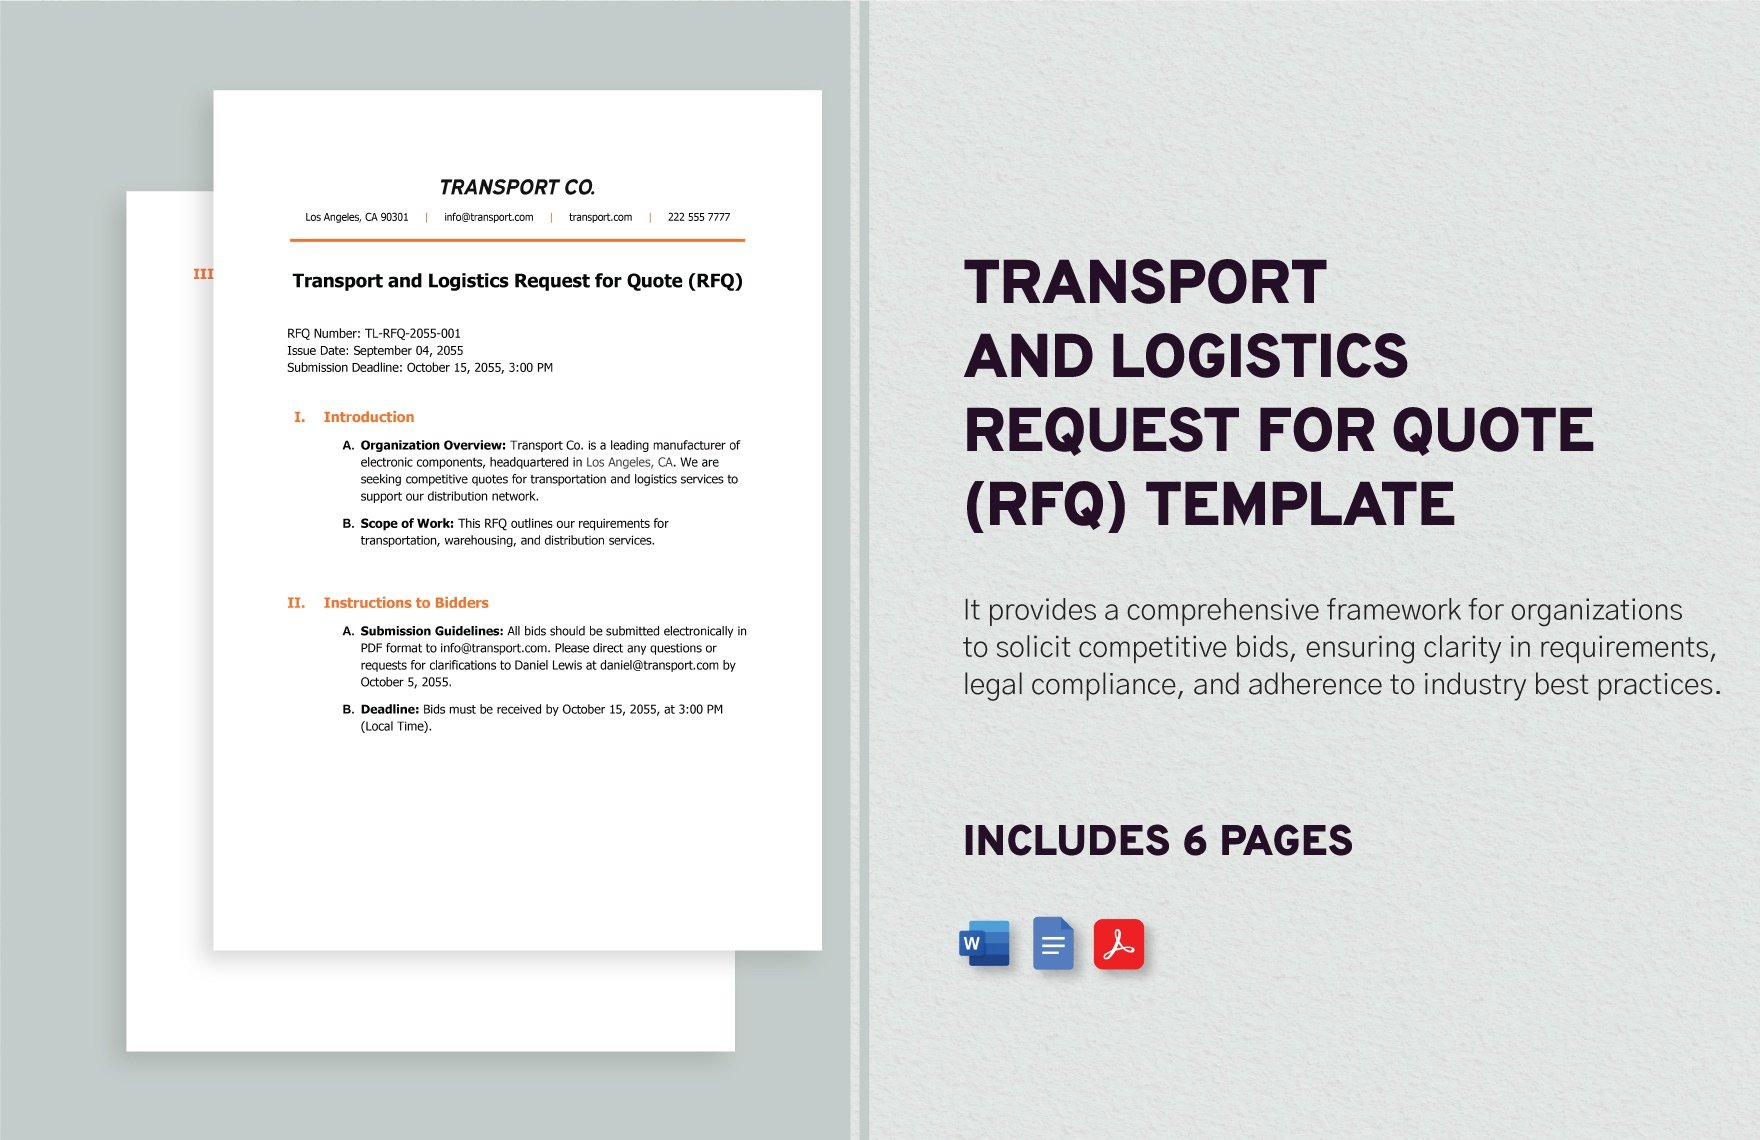 Transport and Logistics Request for Quote (RFQ) Template